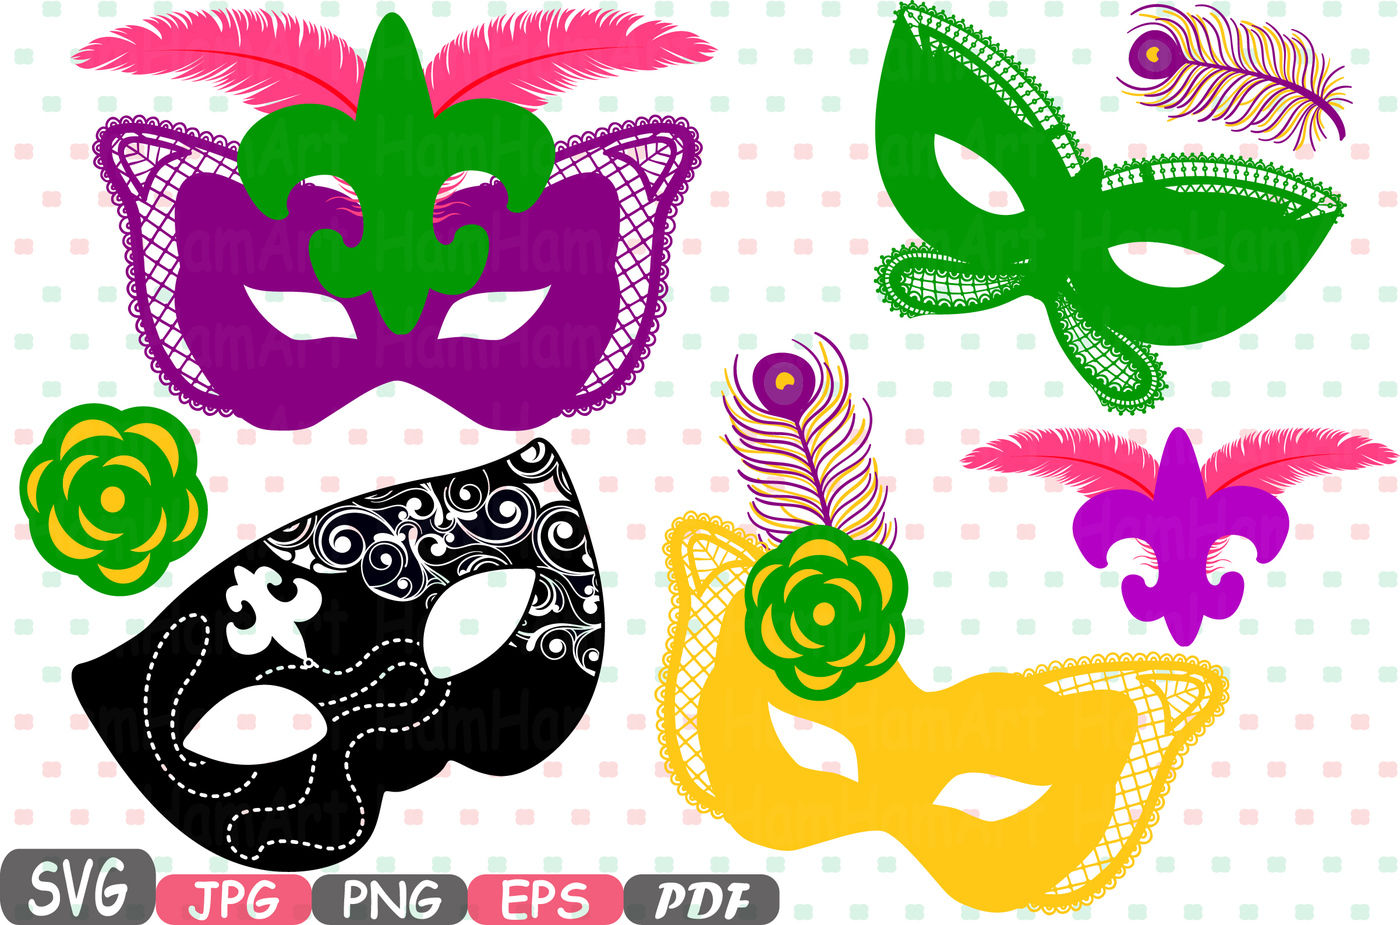 Props Mask Mardi Gras Masquerade Party Photo Booth Silhouette Costume Cutting Files Svg Vinyl Clip Art Antique Clipart Retro 12p By Hamhamart Thehungryjpeg Com